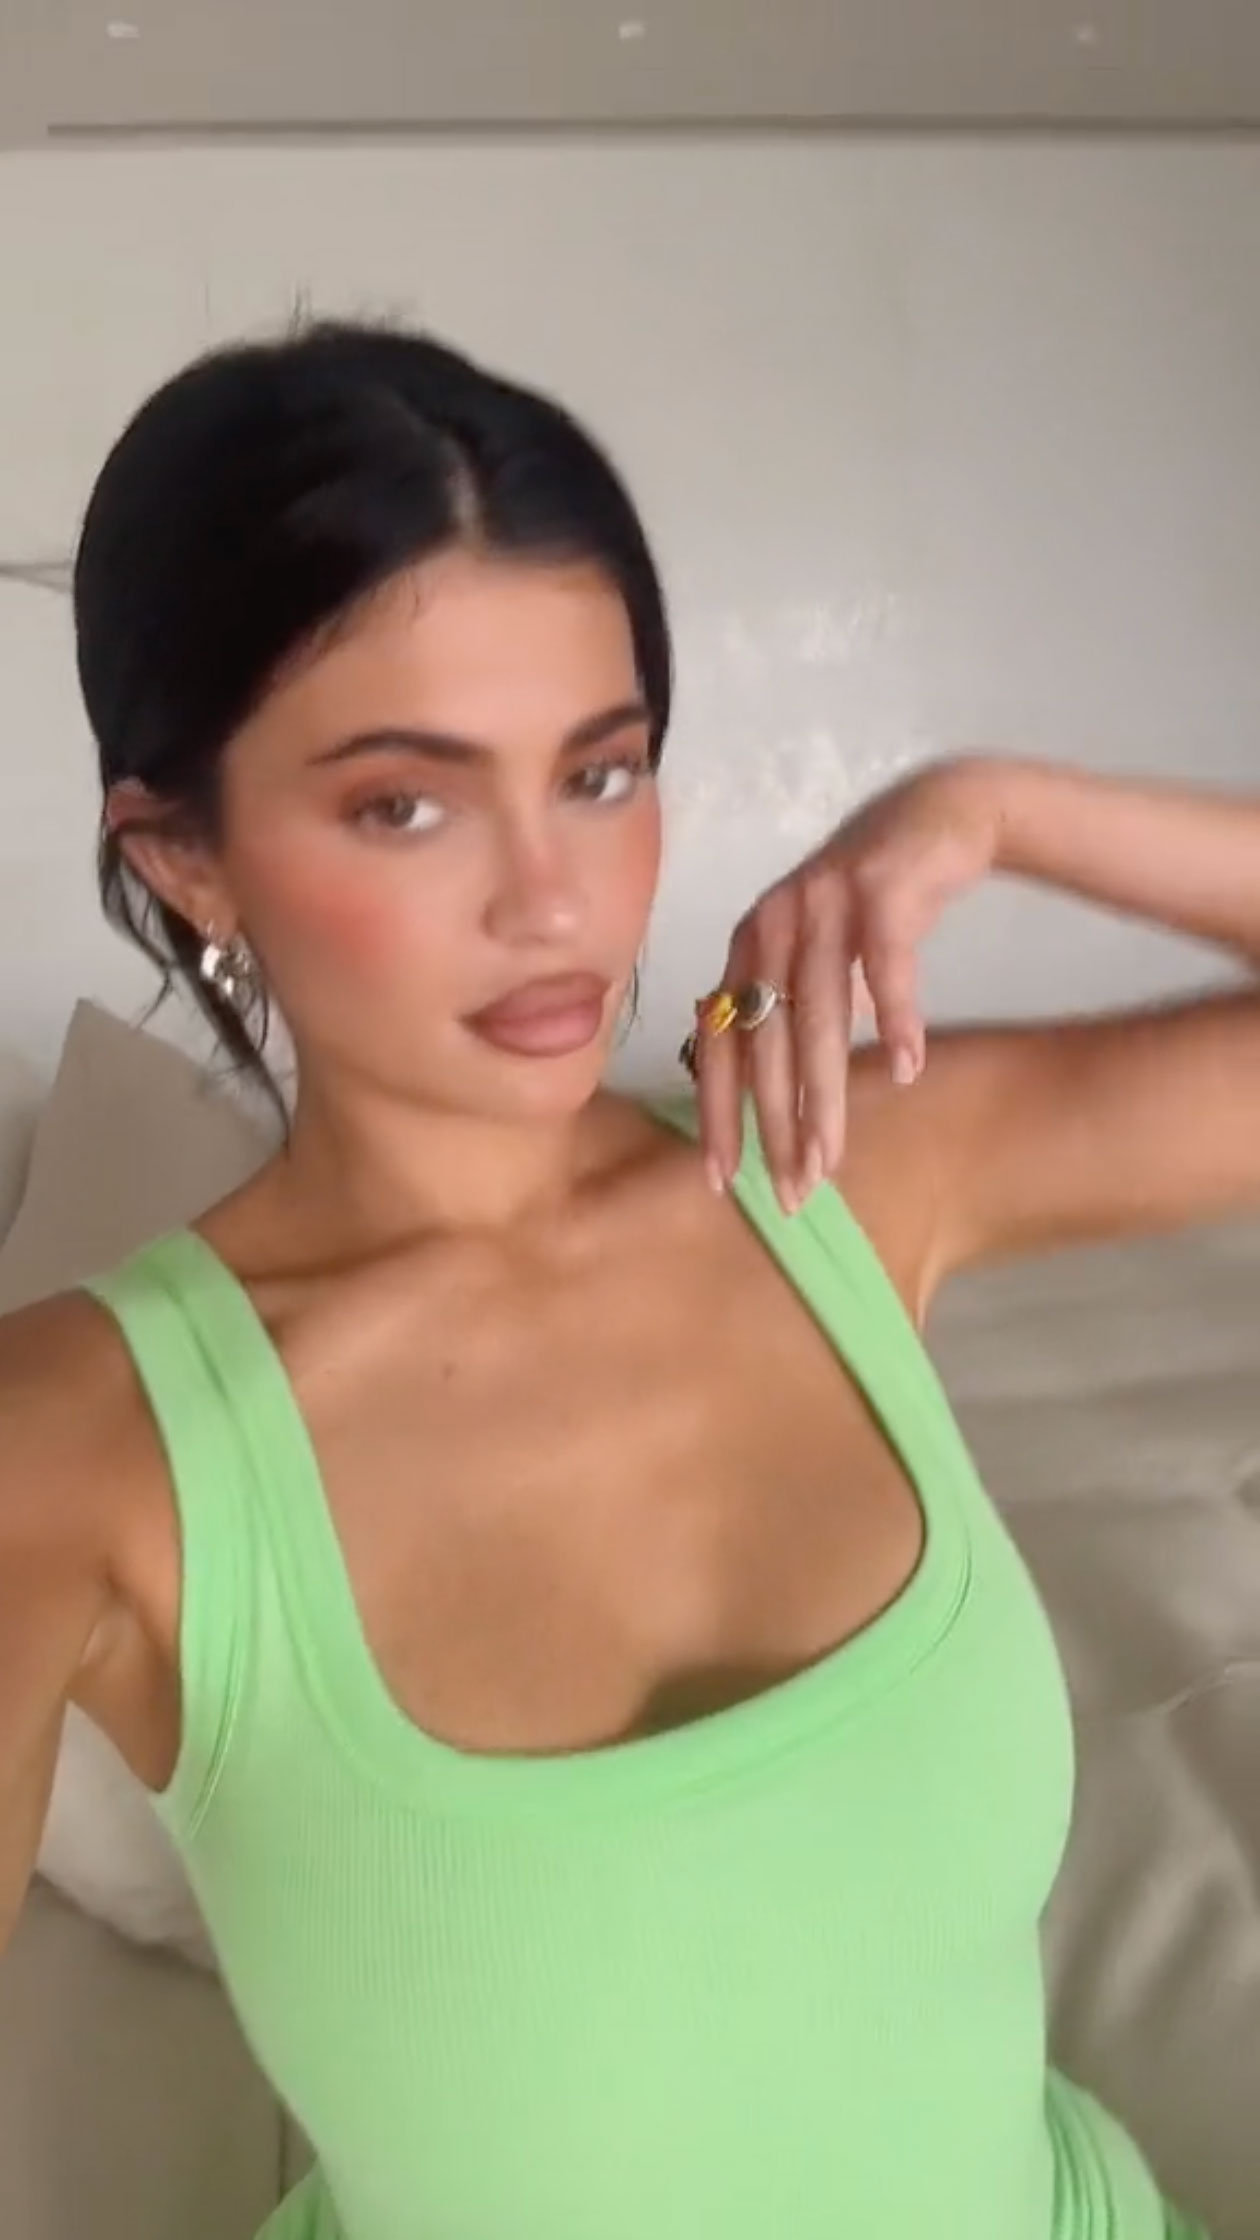 Kylie Jenner spills out of tiny sports bra and shows off her thin waist in skintight spandex shorts for new photos